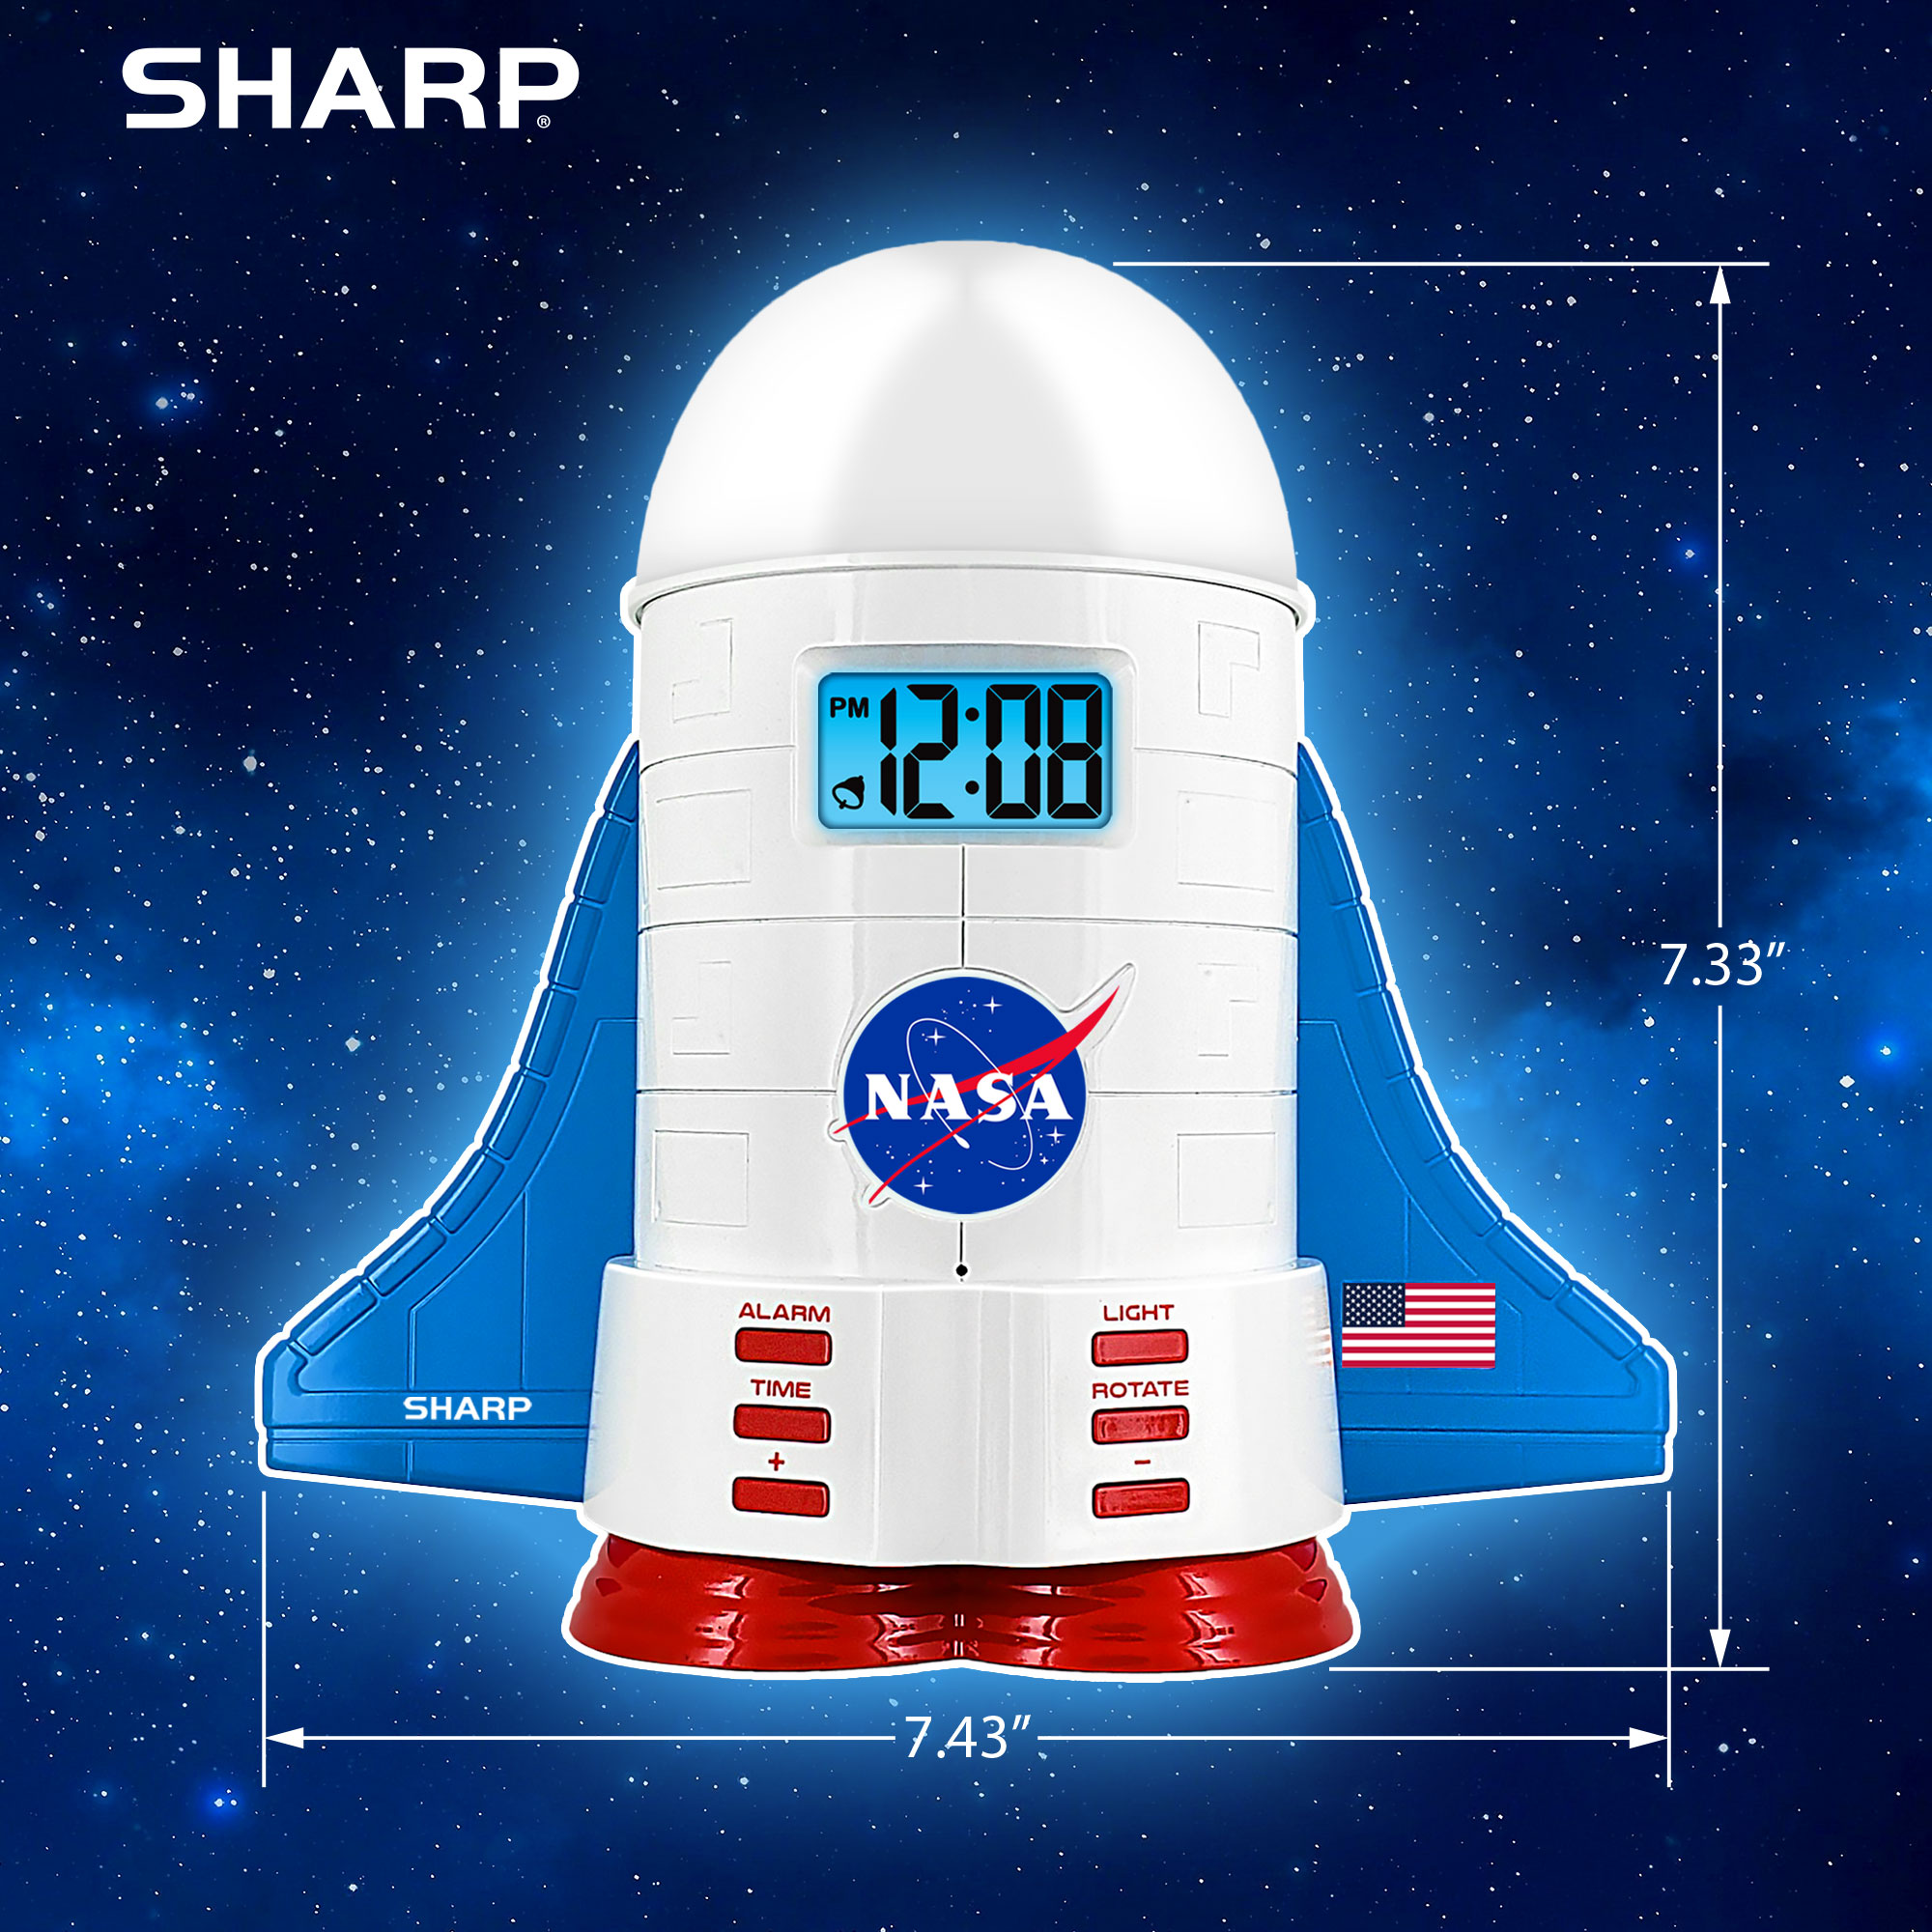 Sharp NASA Space Shuttle Night Light LCD Clock, Nightlight with 4 Color Options, 2 Space Themes - image 5 of 8